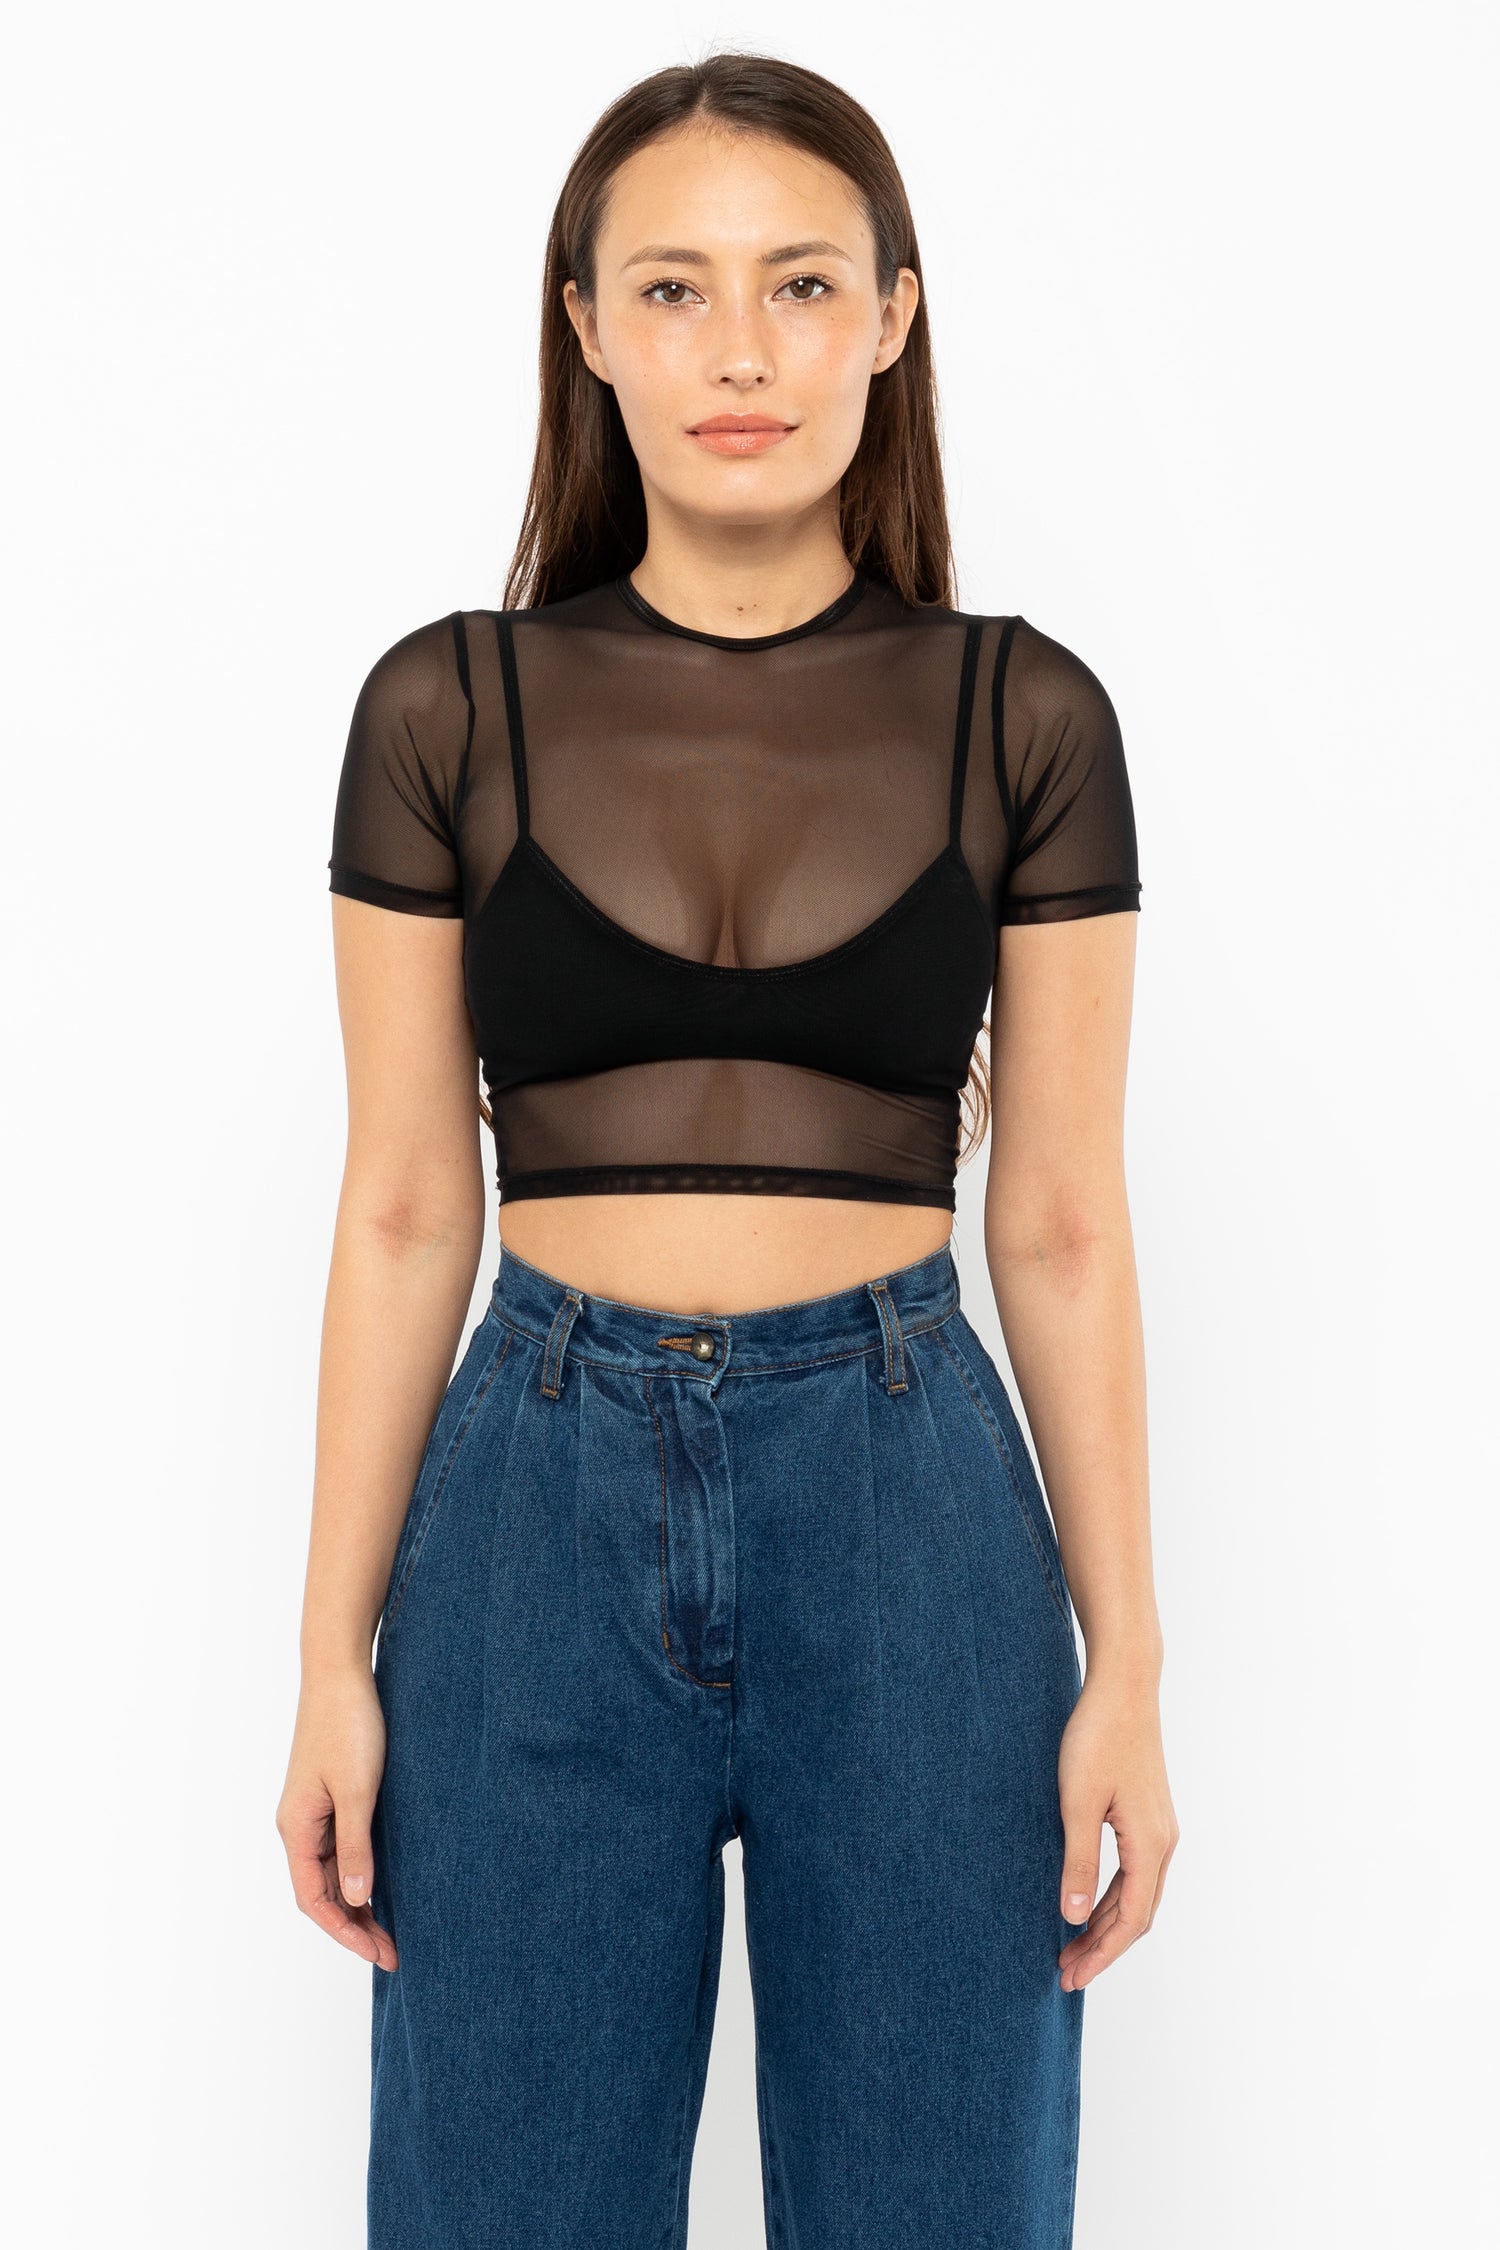 Buy Black See Through Elastic Lace Bralette, Cropped Cami Online in India 